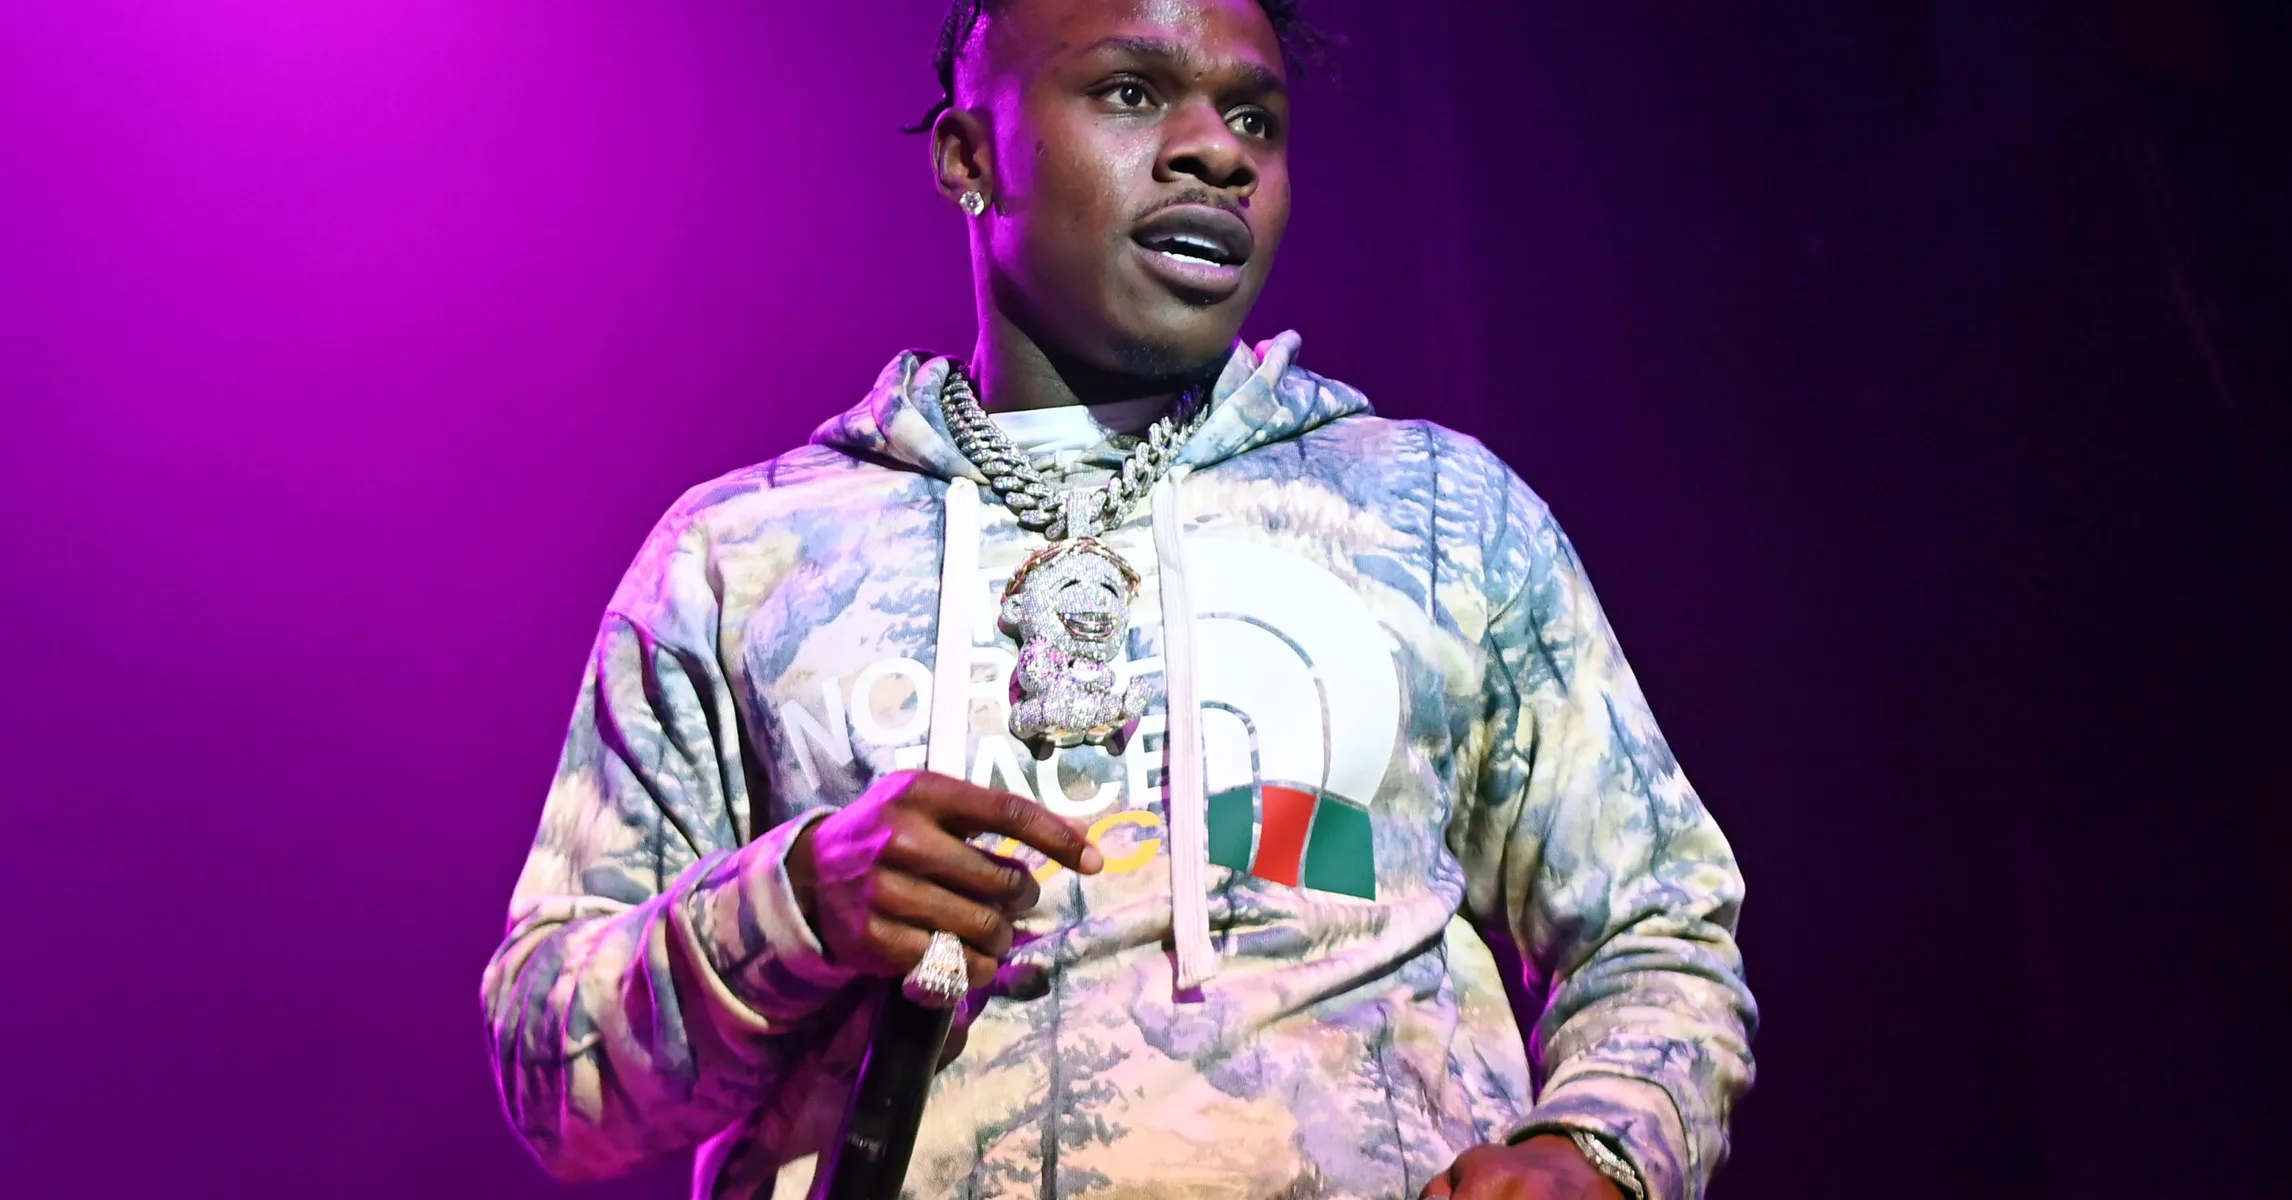 DaBaby Goes Scorched Earth On YouTuber Who Accused Rapper Of Stealing $20K